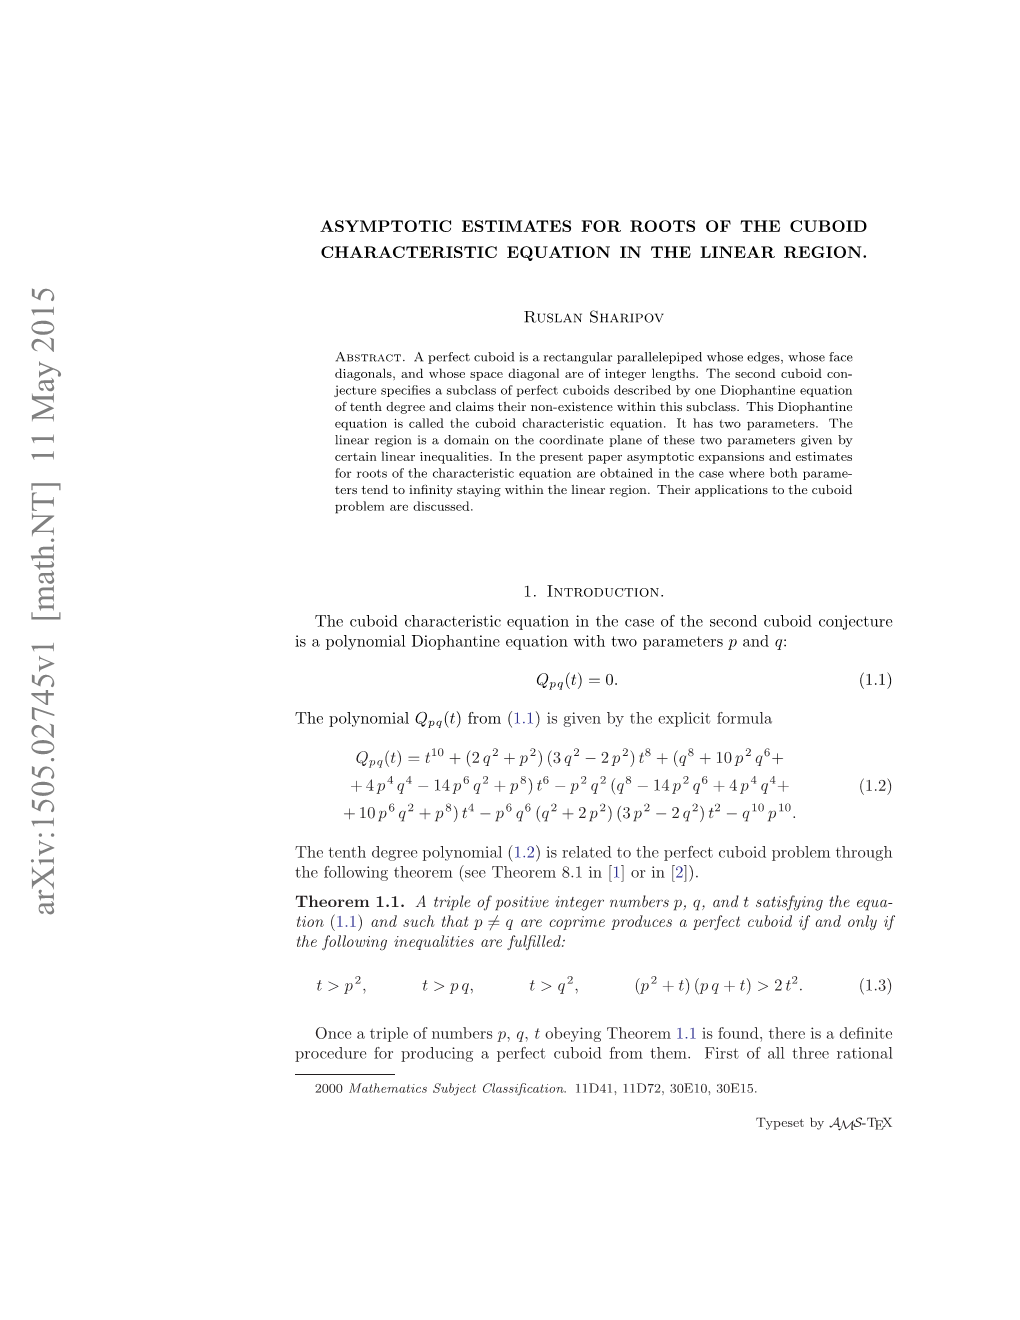 Asymptotic Estimates for Roots of the Cuboid Characteristic Equation in the Case of the Second Cuboid Conjecture, E-Print Arxiv:1505.00724 In